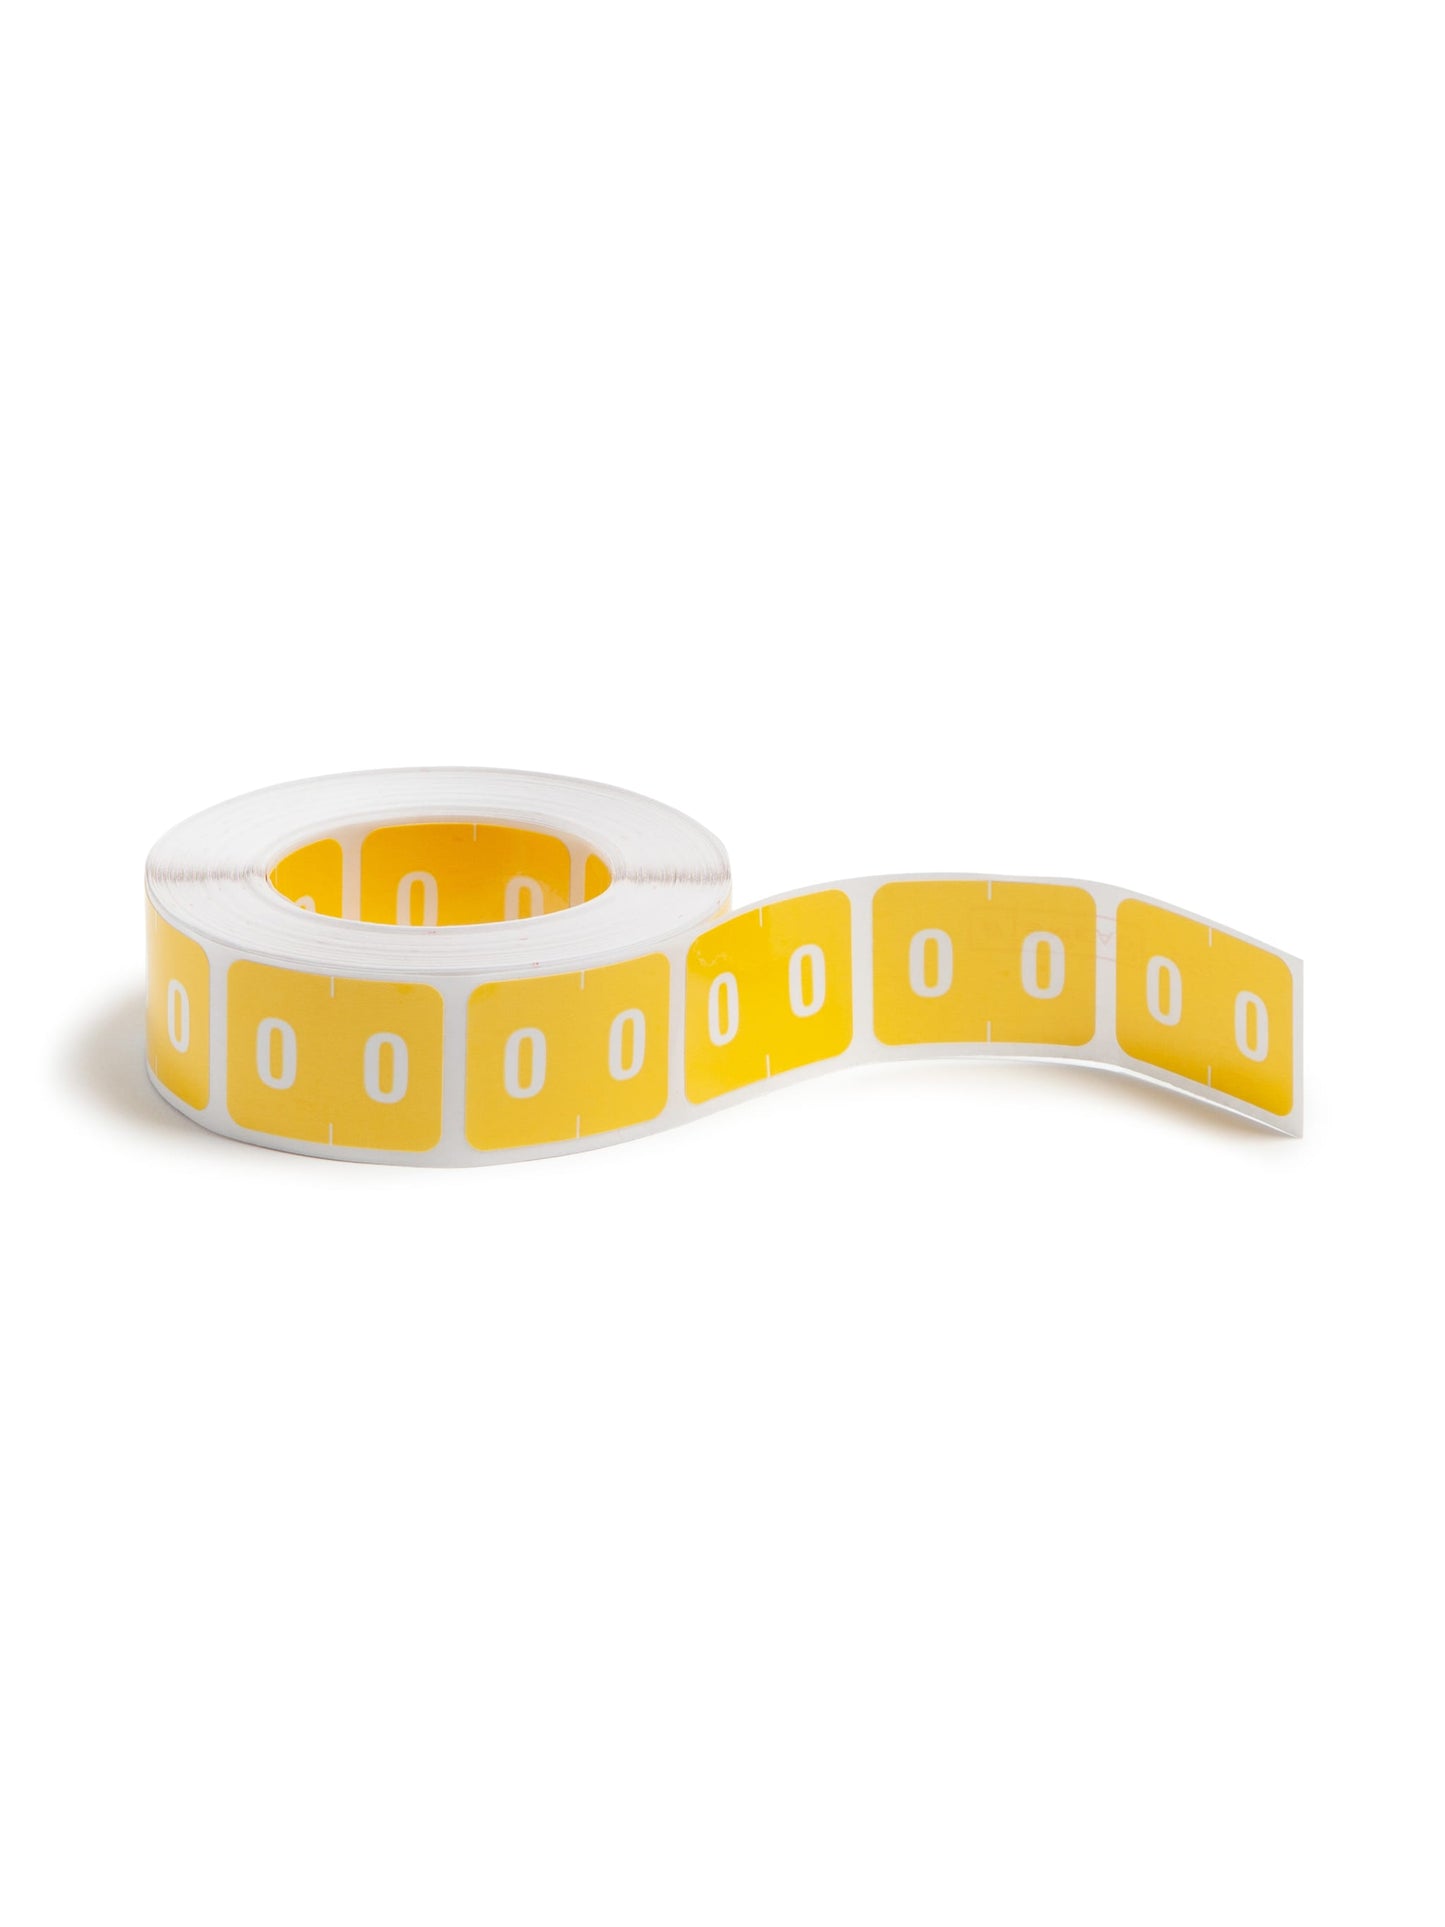 DCCRN Color-Coded Numeric Labels - Rolls, Yellow Color, 1-1/4" X 1" Size, Set of 1, 086486673402